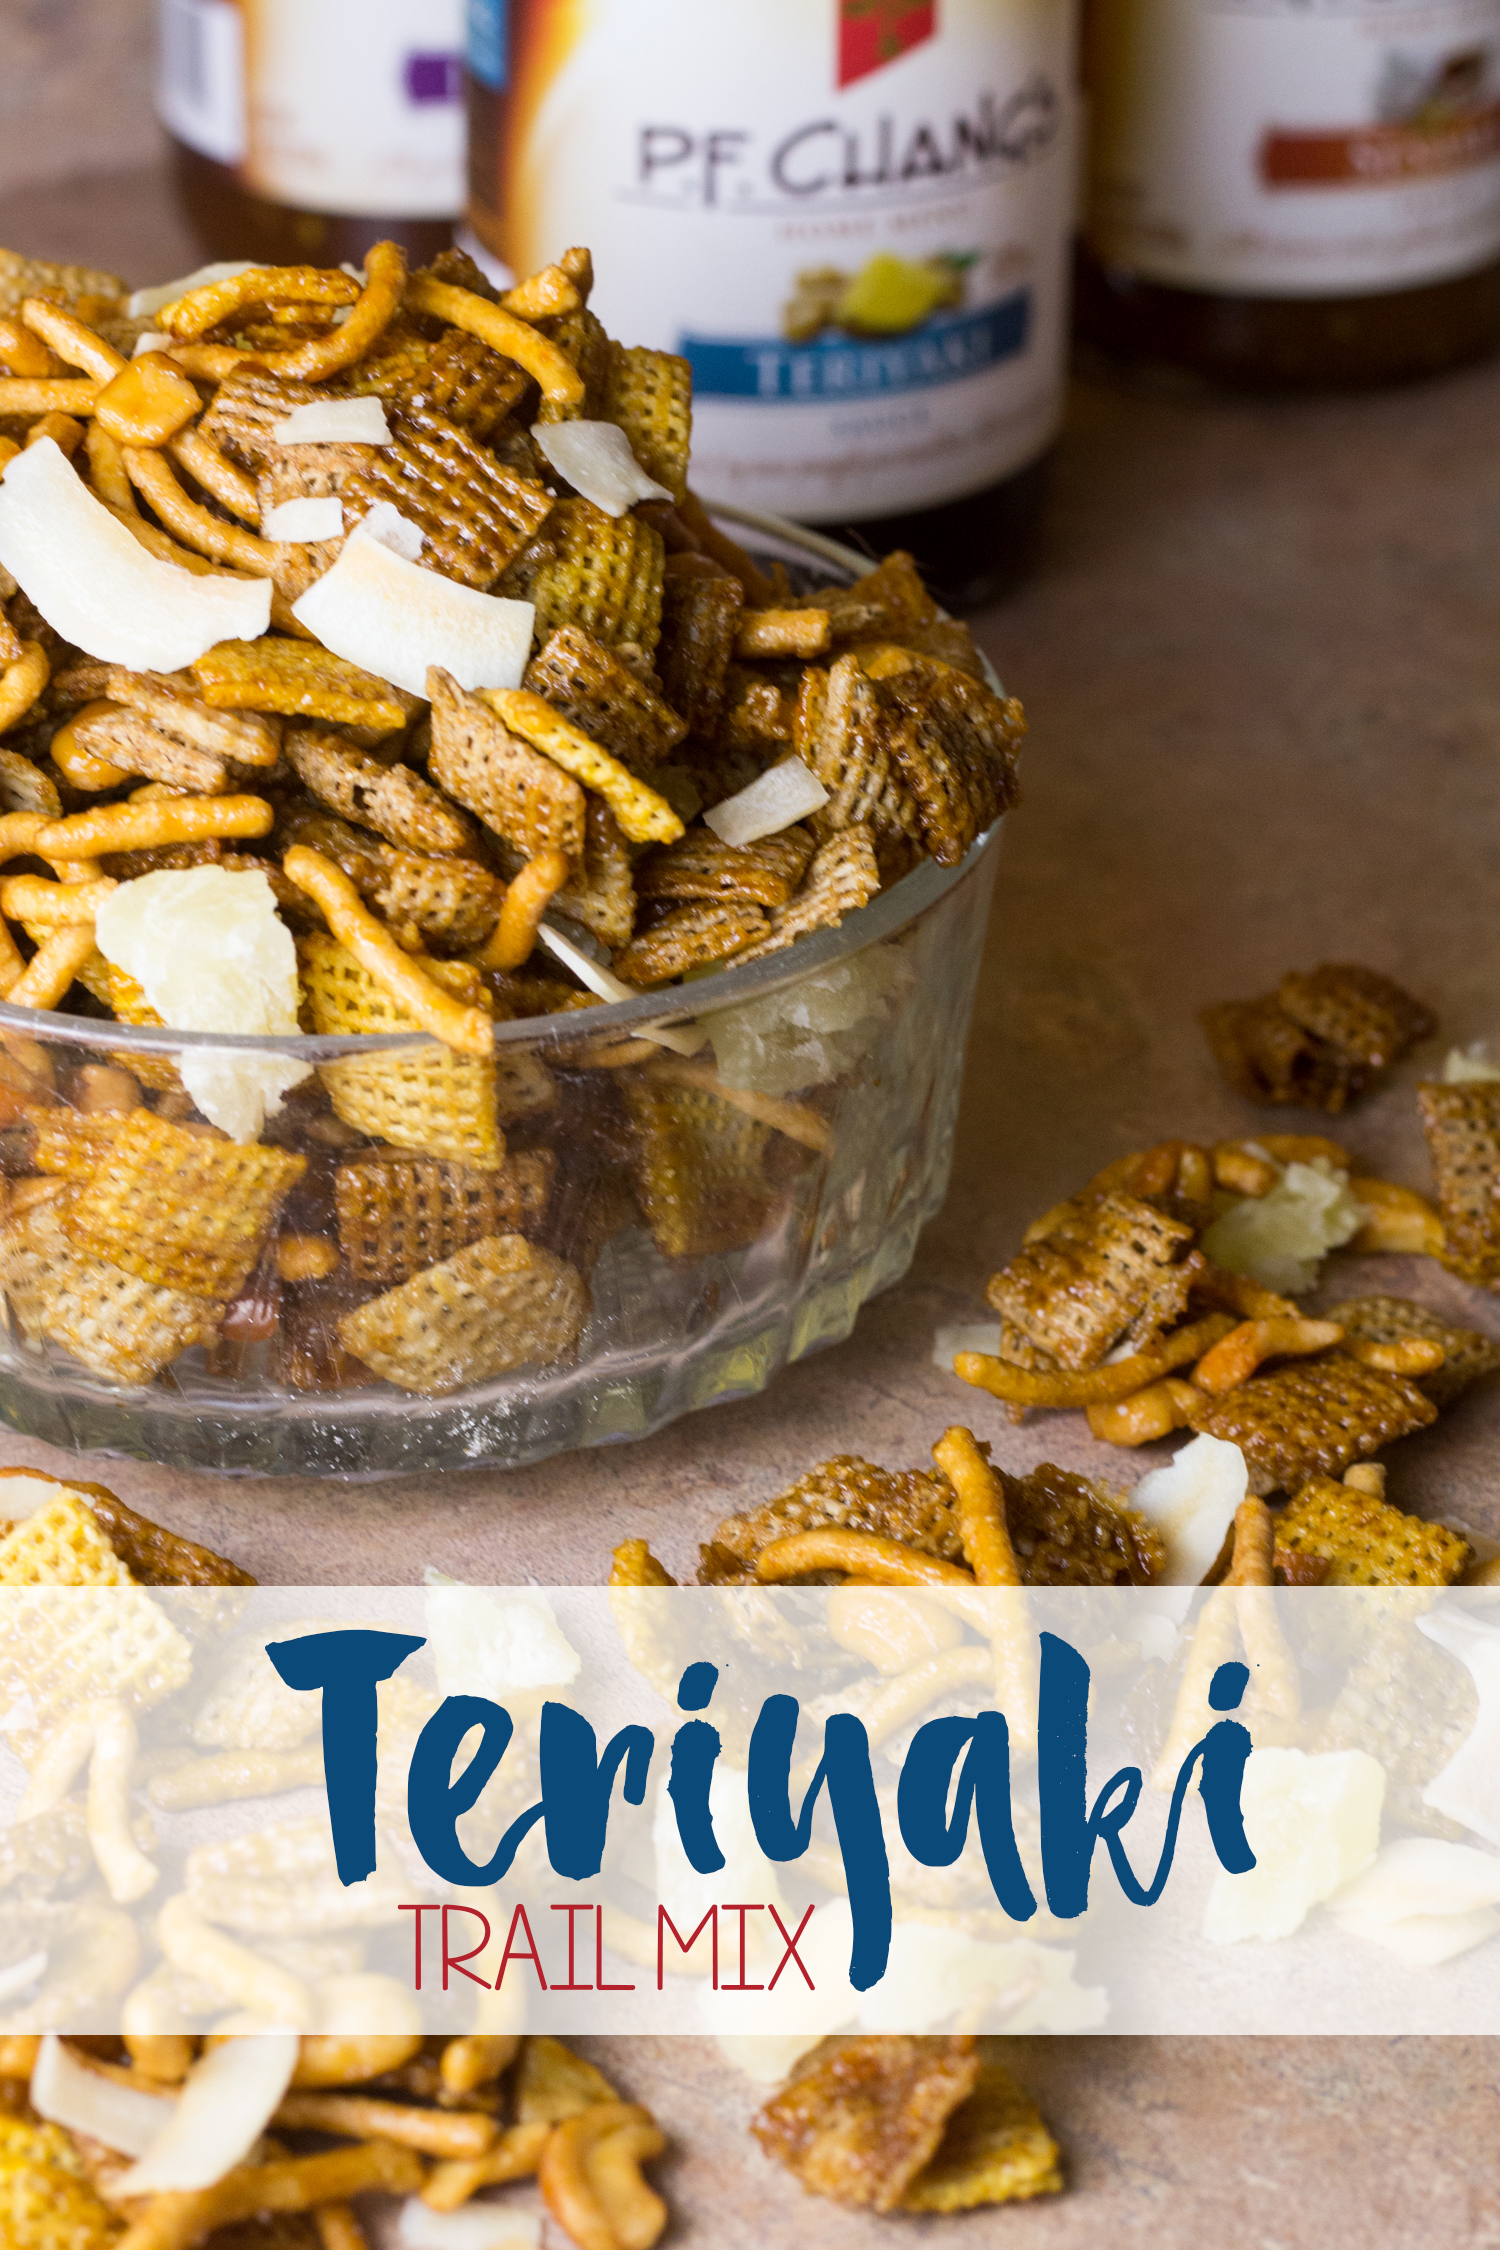 If you want plenty of Asian flavor on the go, I've got the #SimpleSecret. This trail mix is so easy to make using cereal, chow mein noodles, cashews, pineapple, coconut, and a little P.F. Chang's® Home Menu Teriyaki sauce. Your summer hikes, trips to the zoo, and road trips will never be the same because this fun snack tastes great and will keep you fueled for the journey ahead. [ad]